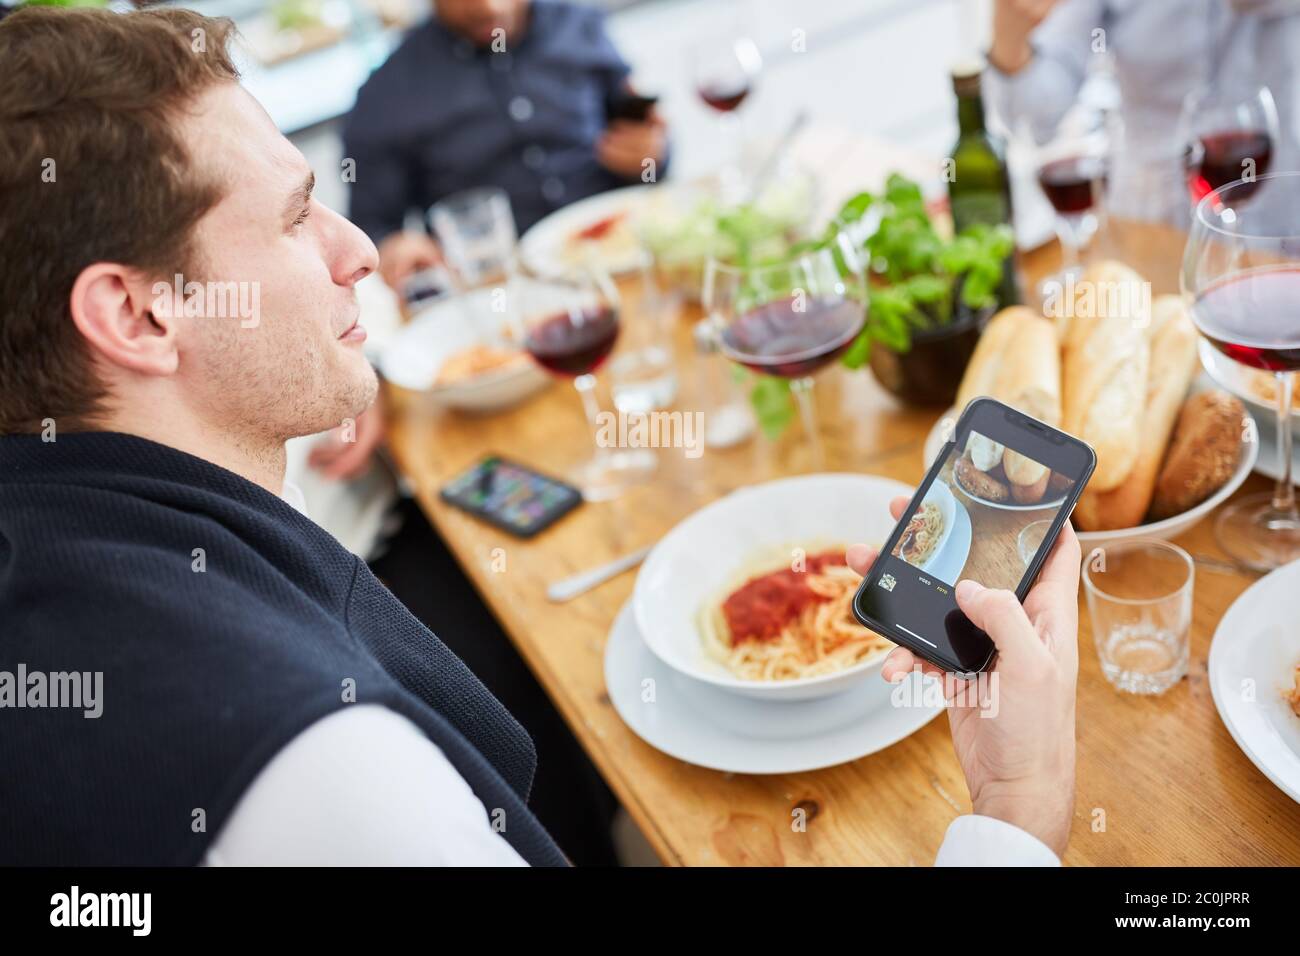 Man uses smartphone while eating pasta with friends at table Stock Photo